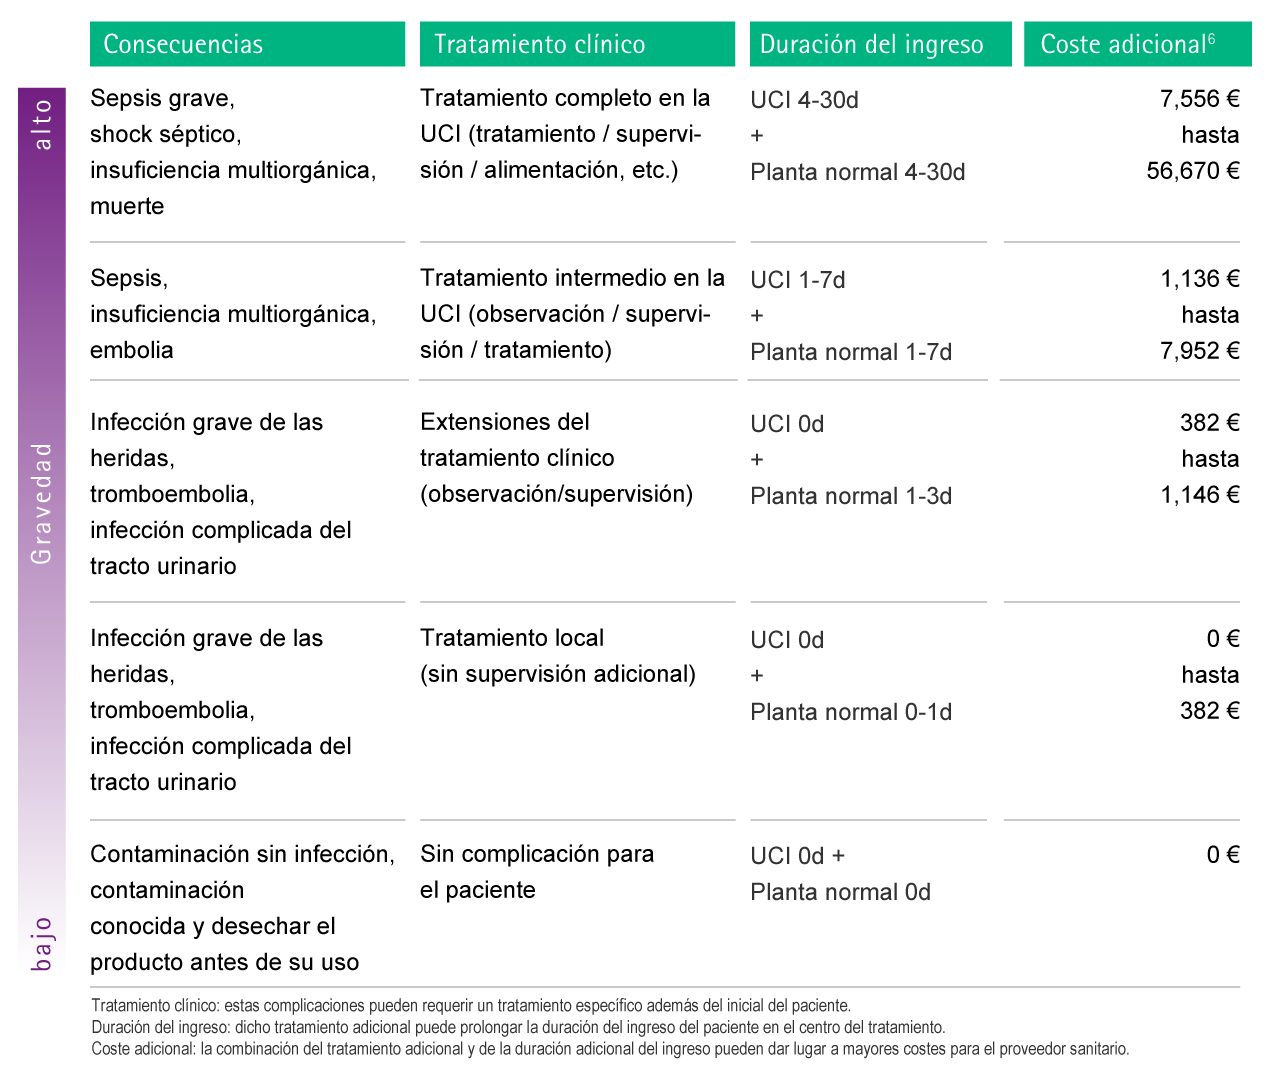 Table with estimations of possible additional costs as a consequence of complications caused by Microbiological Contamination.